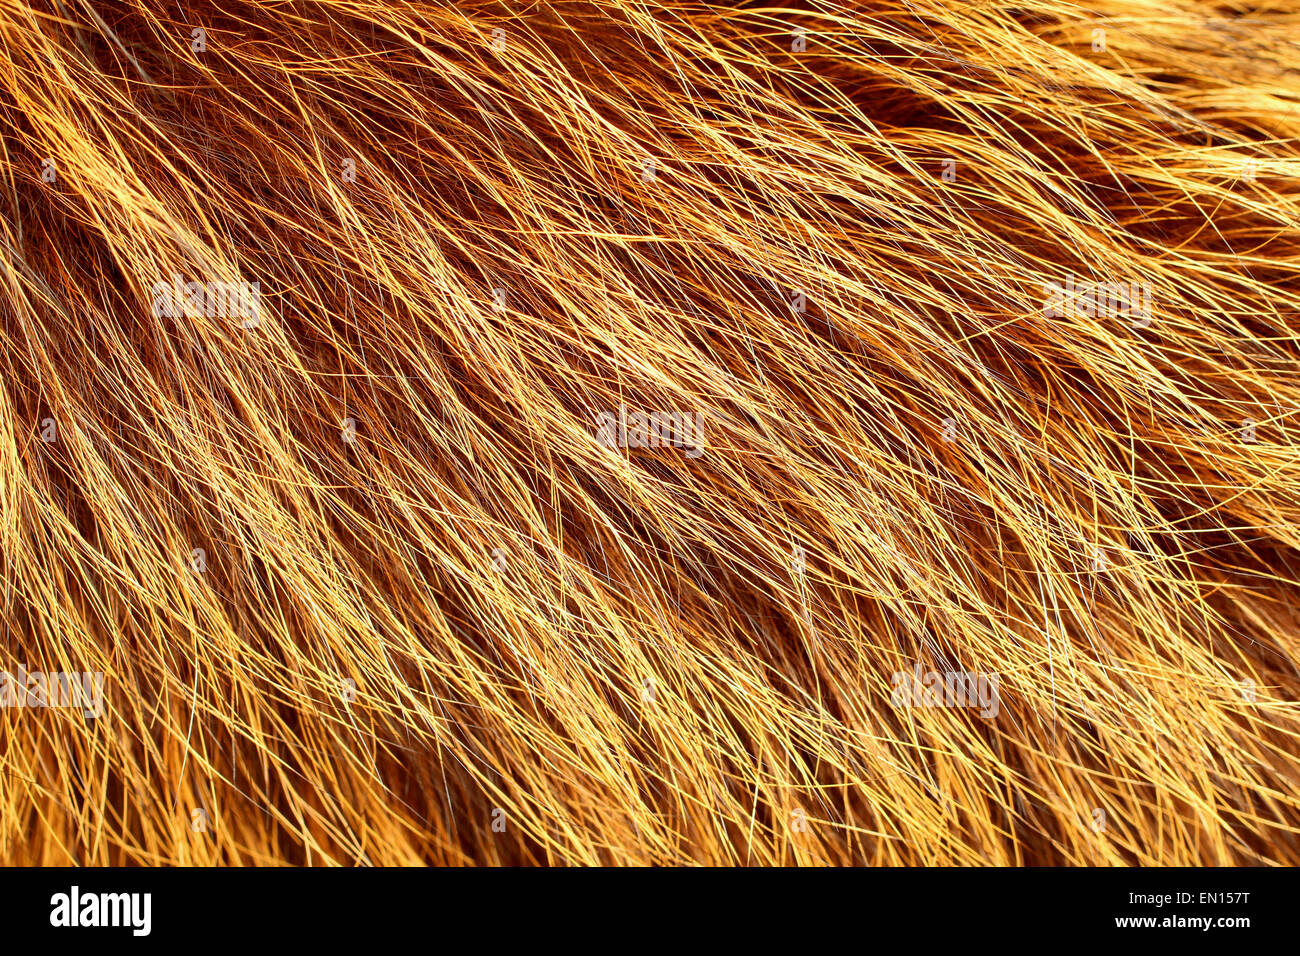 Yellow, brown and black colored fox fur Stock Photo